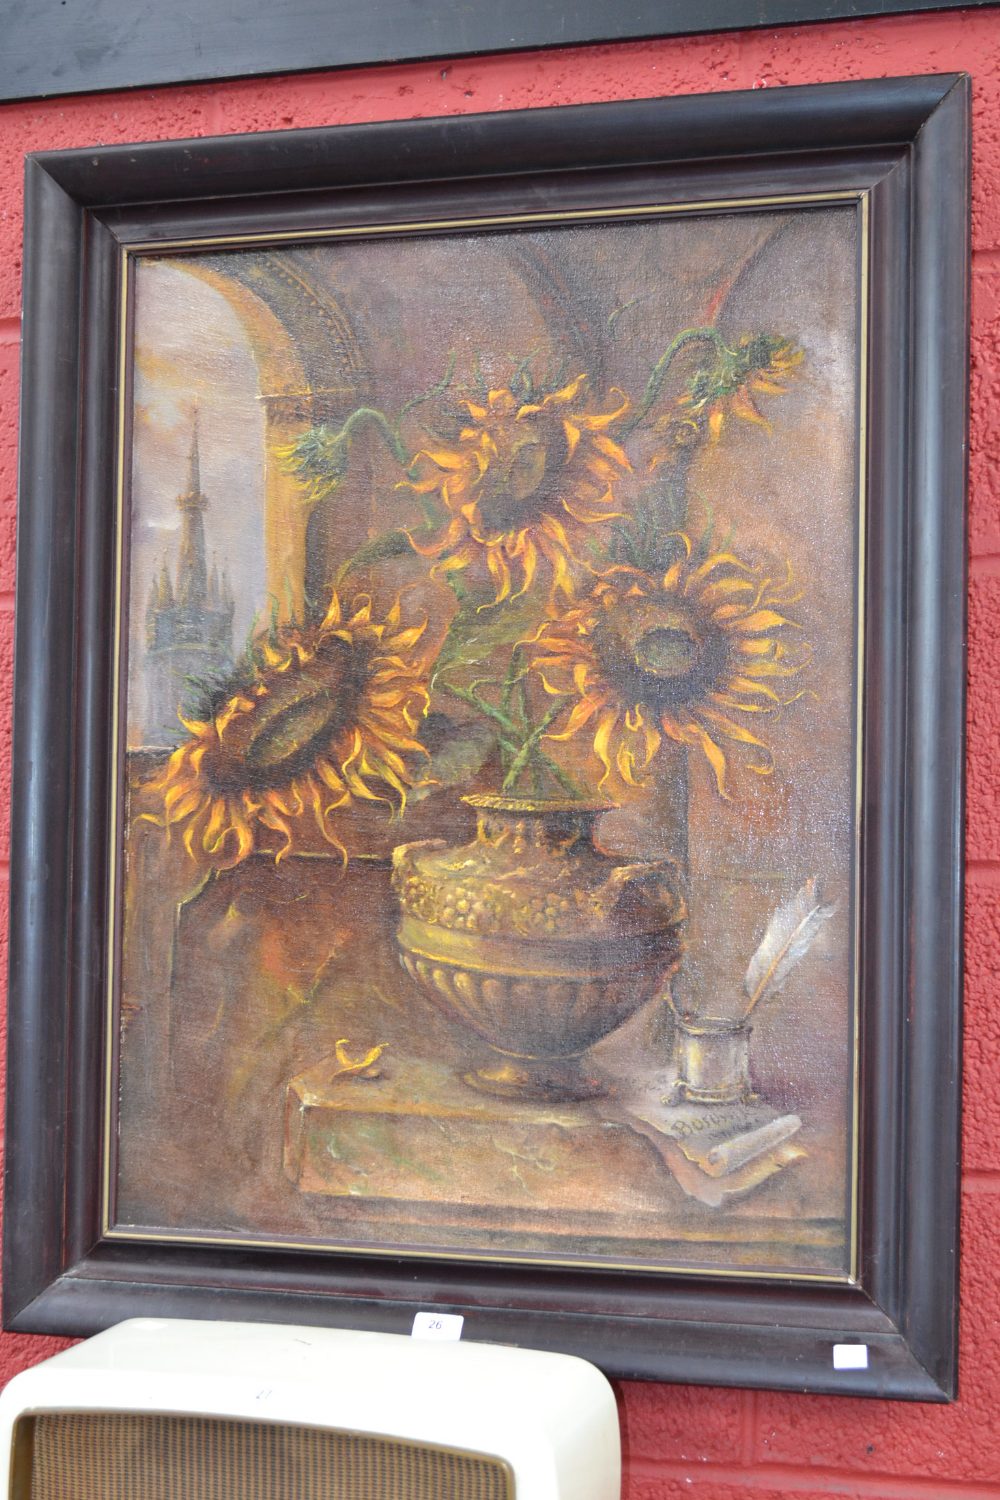 B.F. Borowik (Polish)
The Sunflowers
Oil on canvas
Signed, titled to verso
Dated 1989, framed